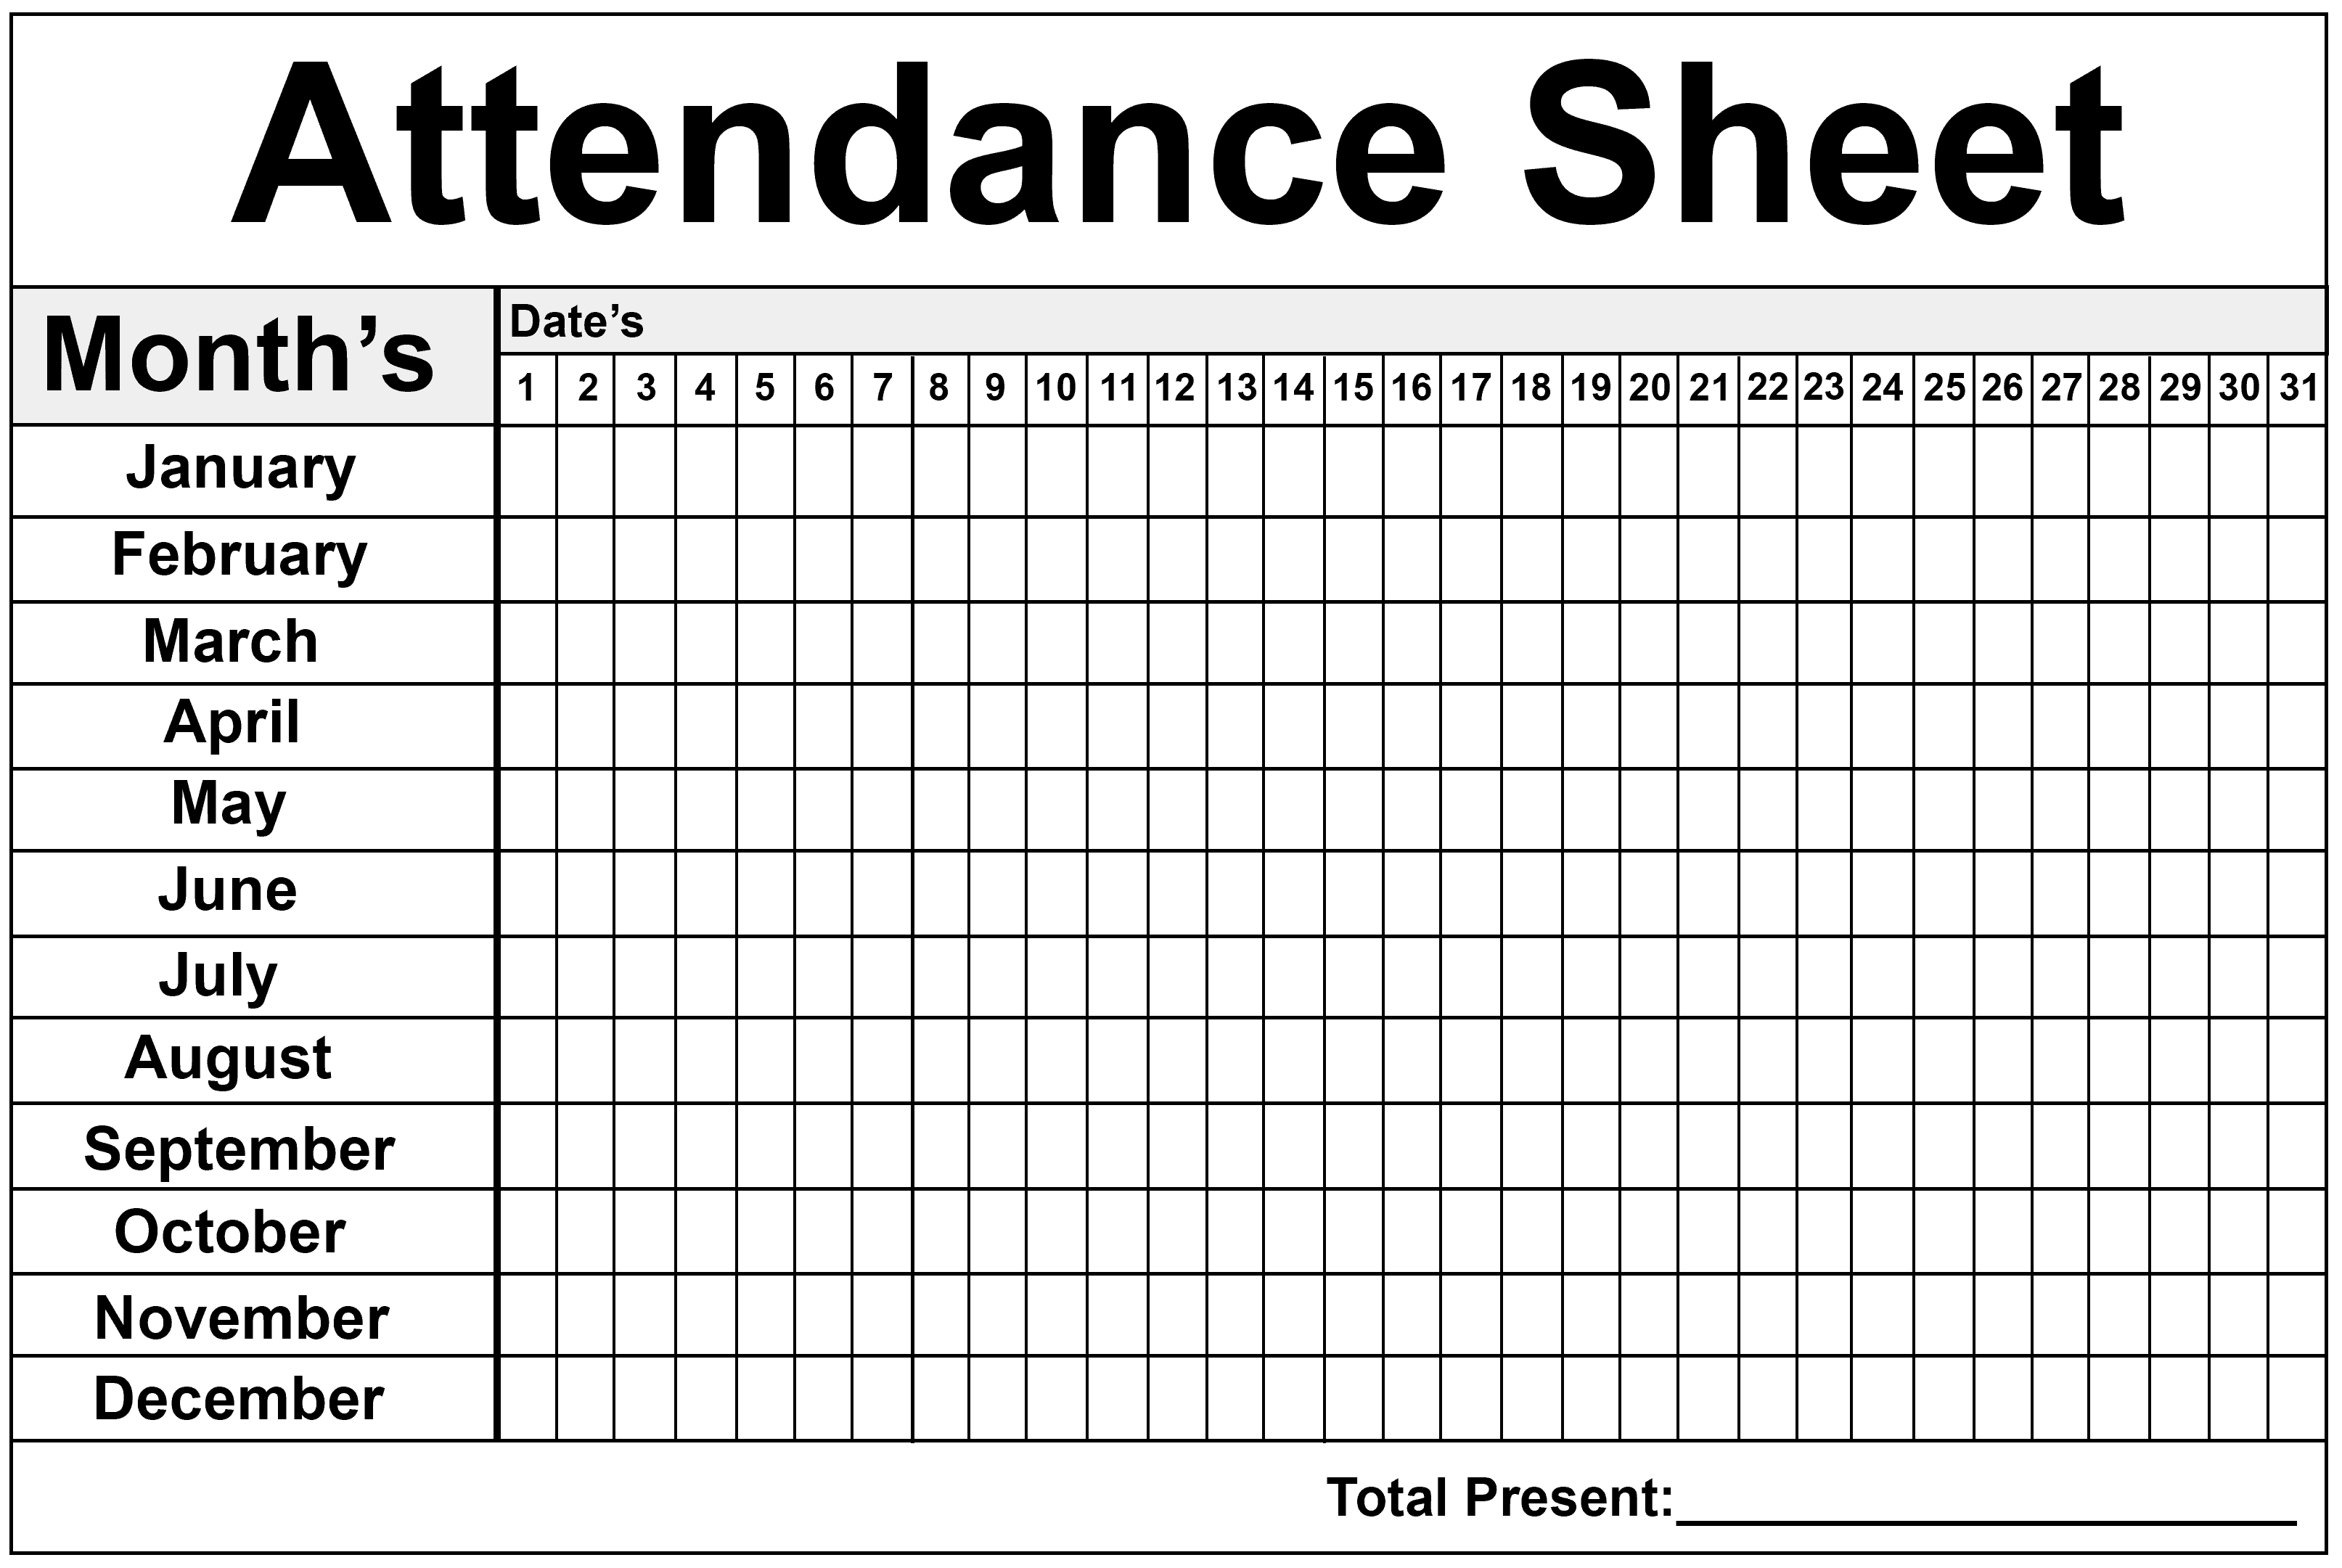 Daily Monthly Employee Attendance Sheet Template Free HowToWiki